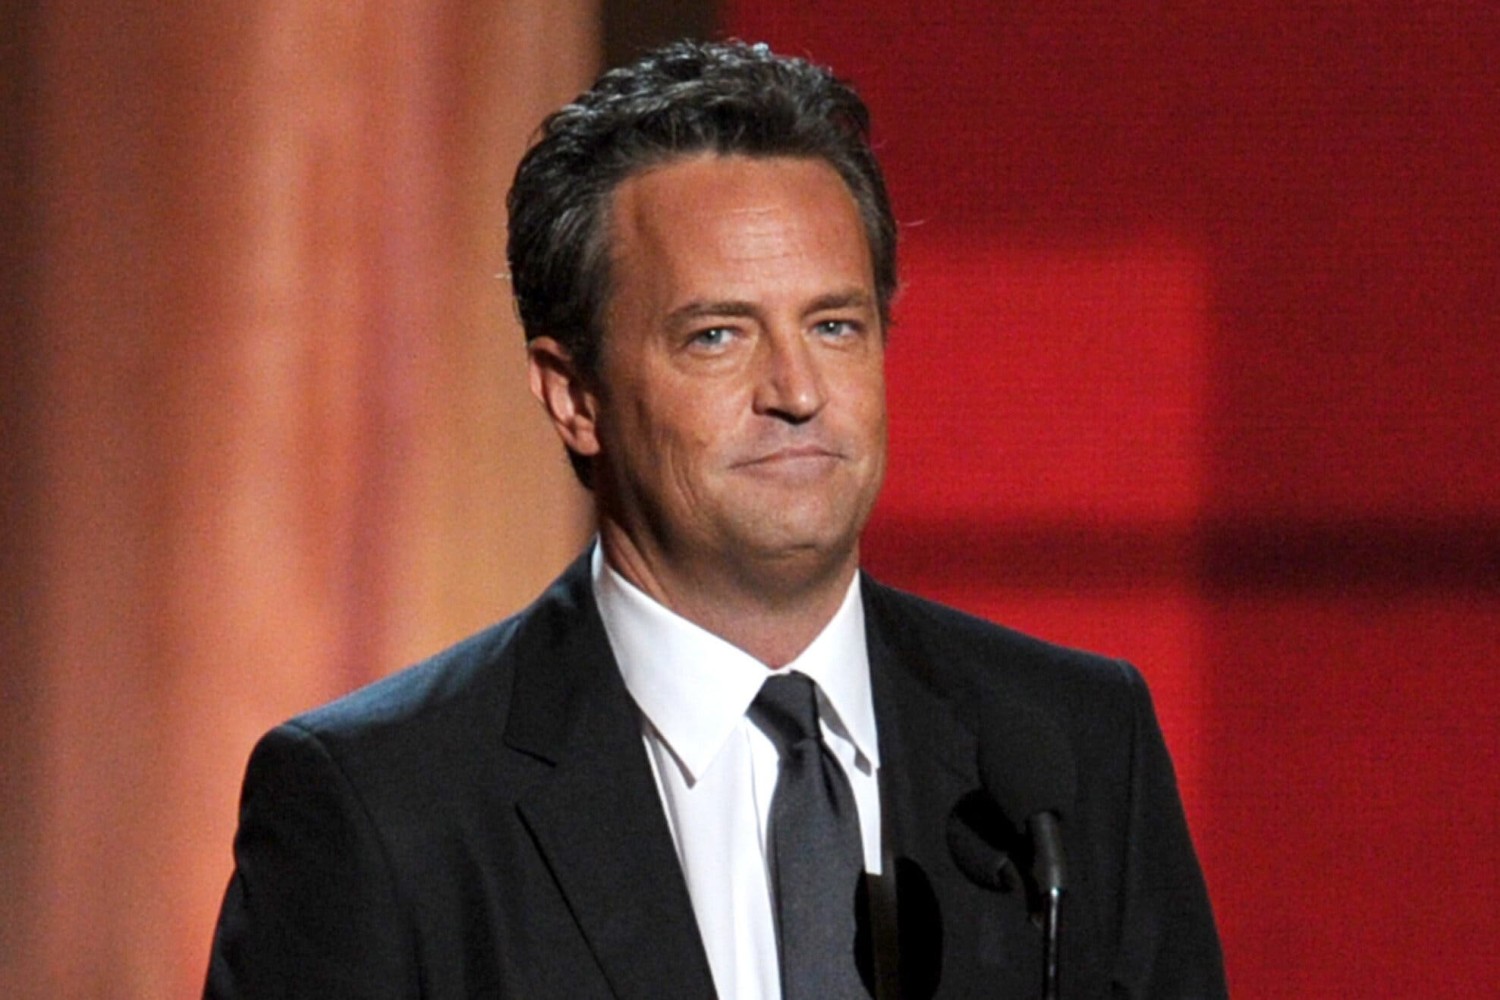 The coroner’s office said Matthew Perry had ketamine and the opioid buprenorphine in his system when drowned in a hot tub at his home in Los Angeles in October. Credit...Kevin Winter/Getty Images